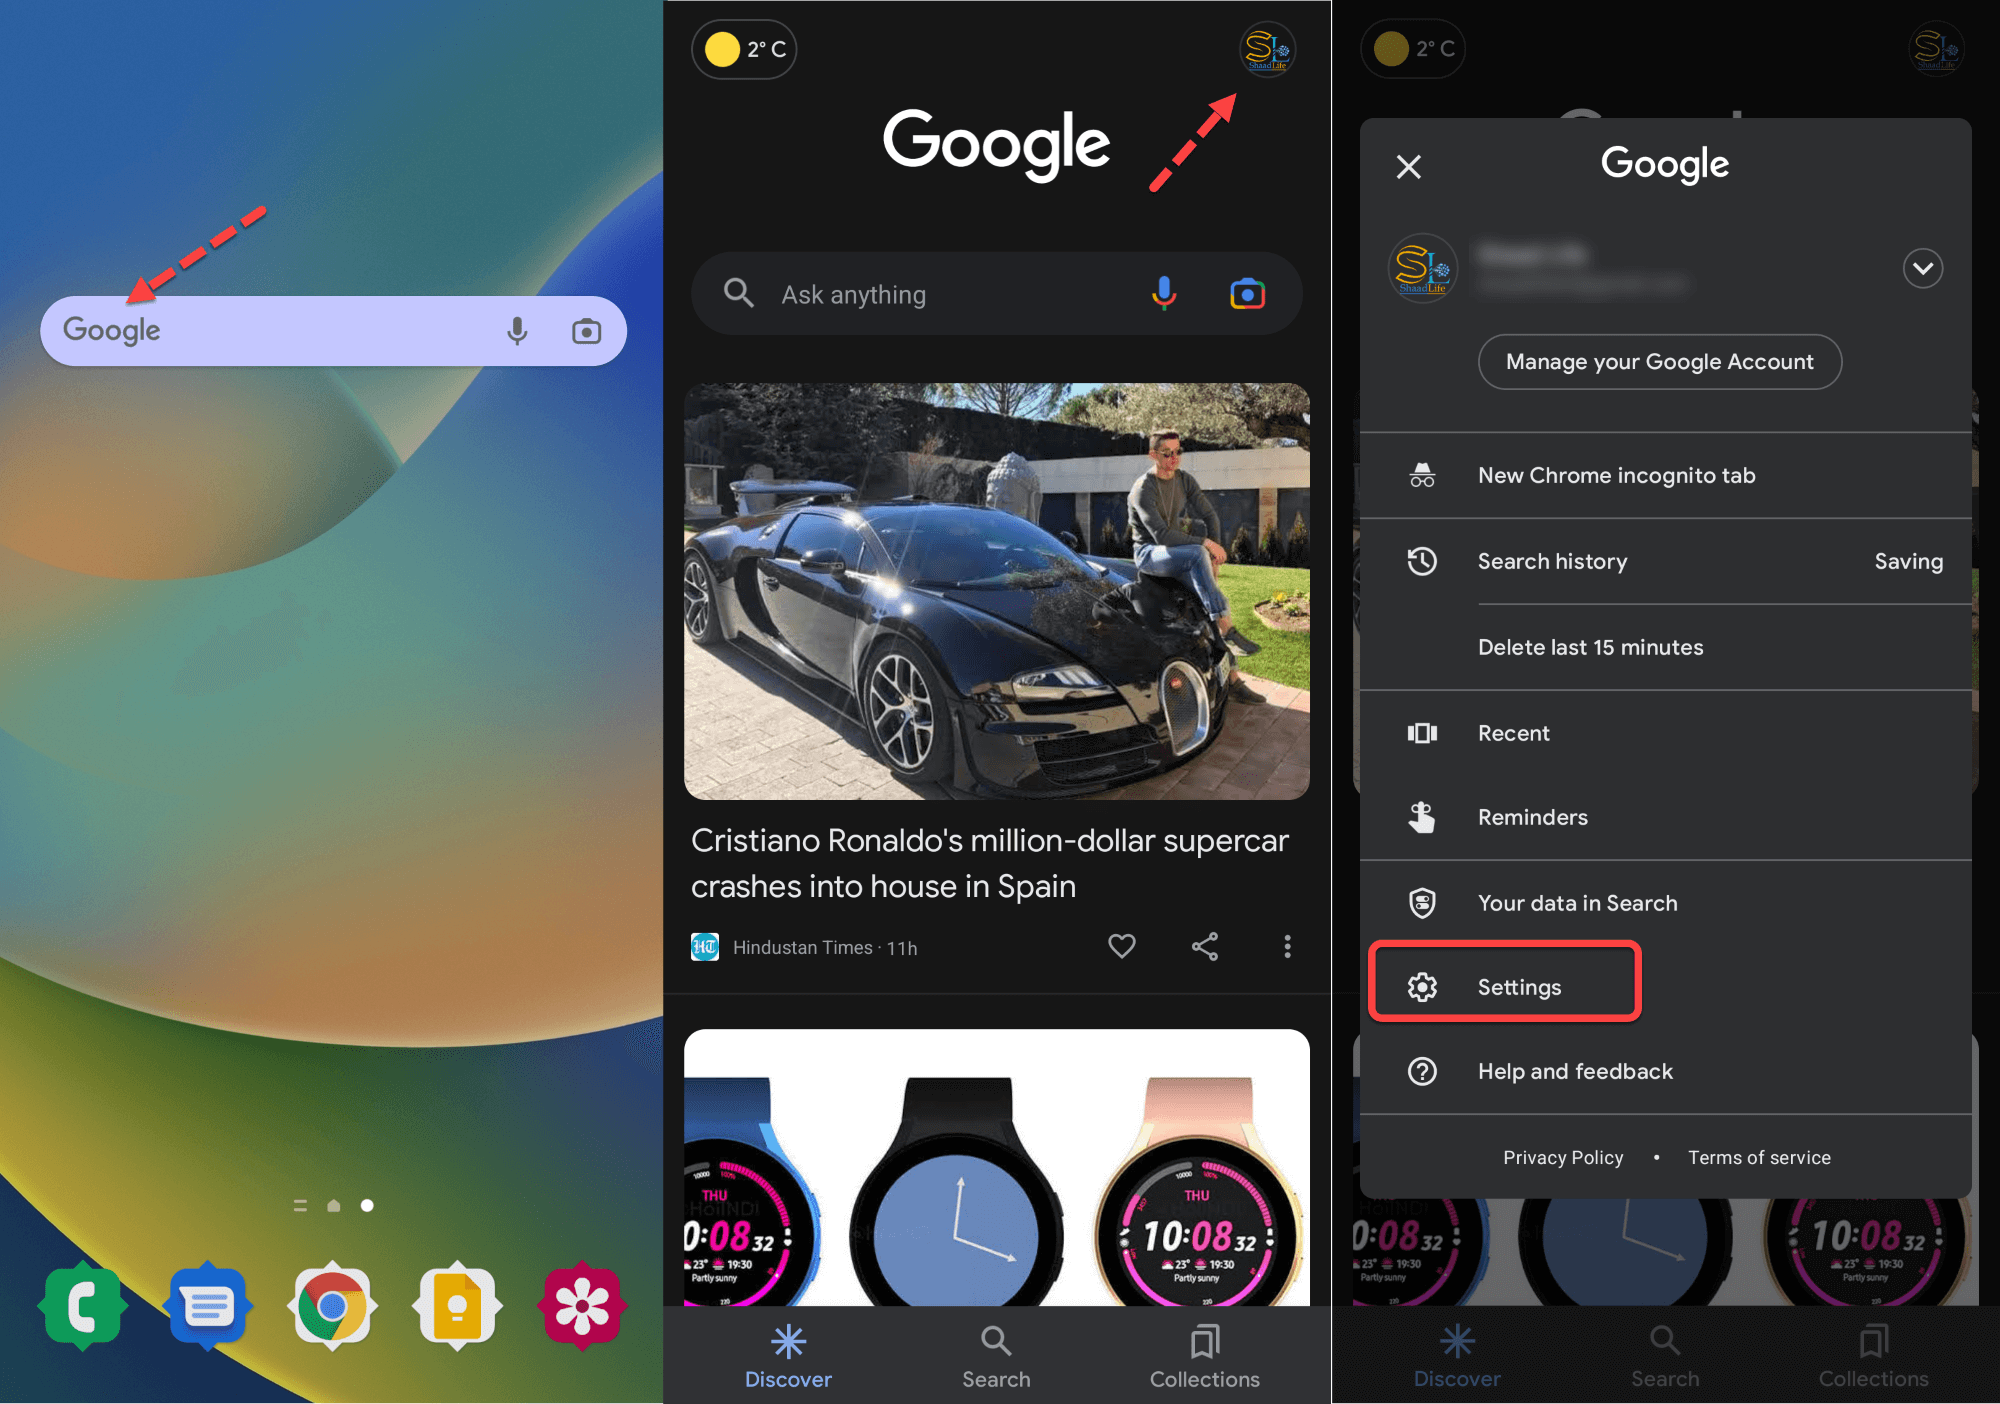 Personalize the Google Search Bar Widget on Samsung Galaxy Phone